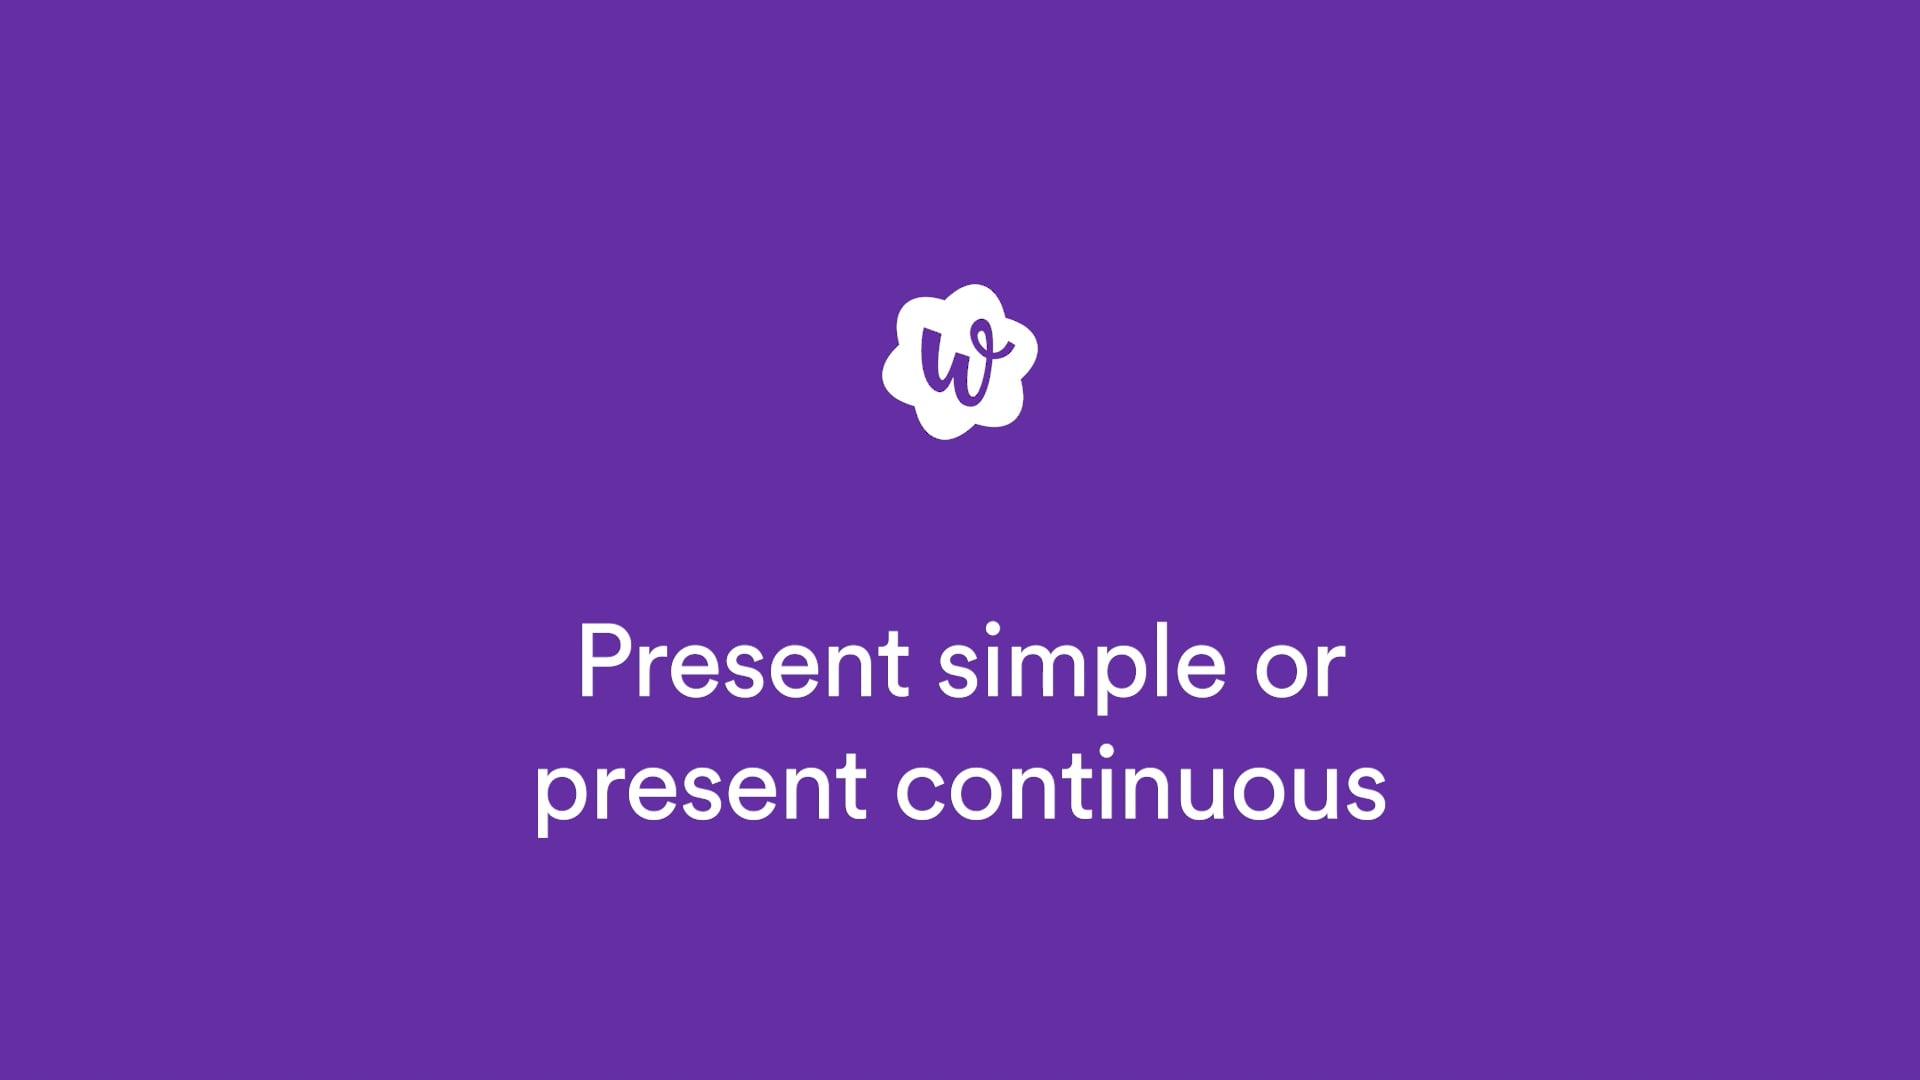 Present and present simple |